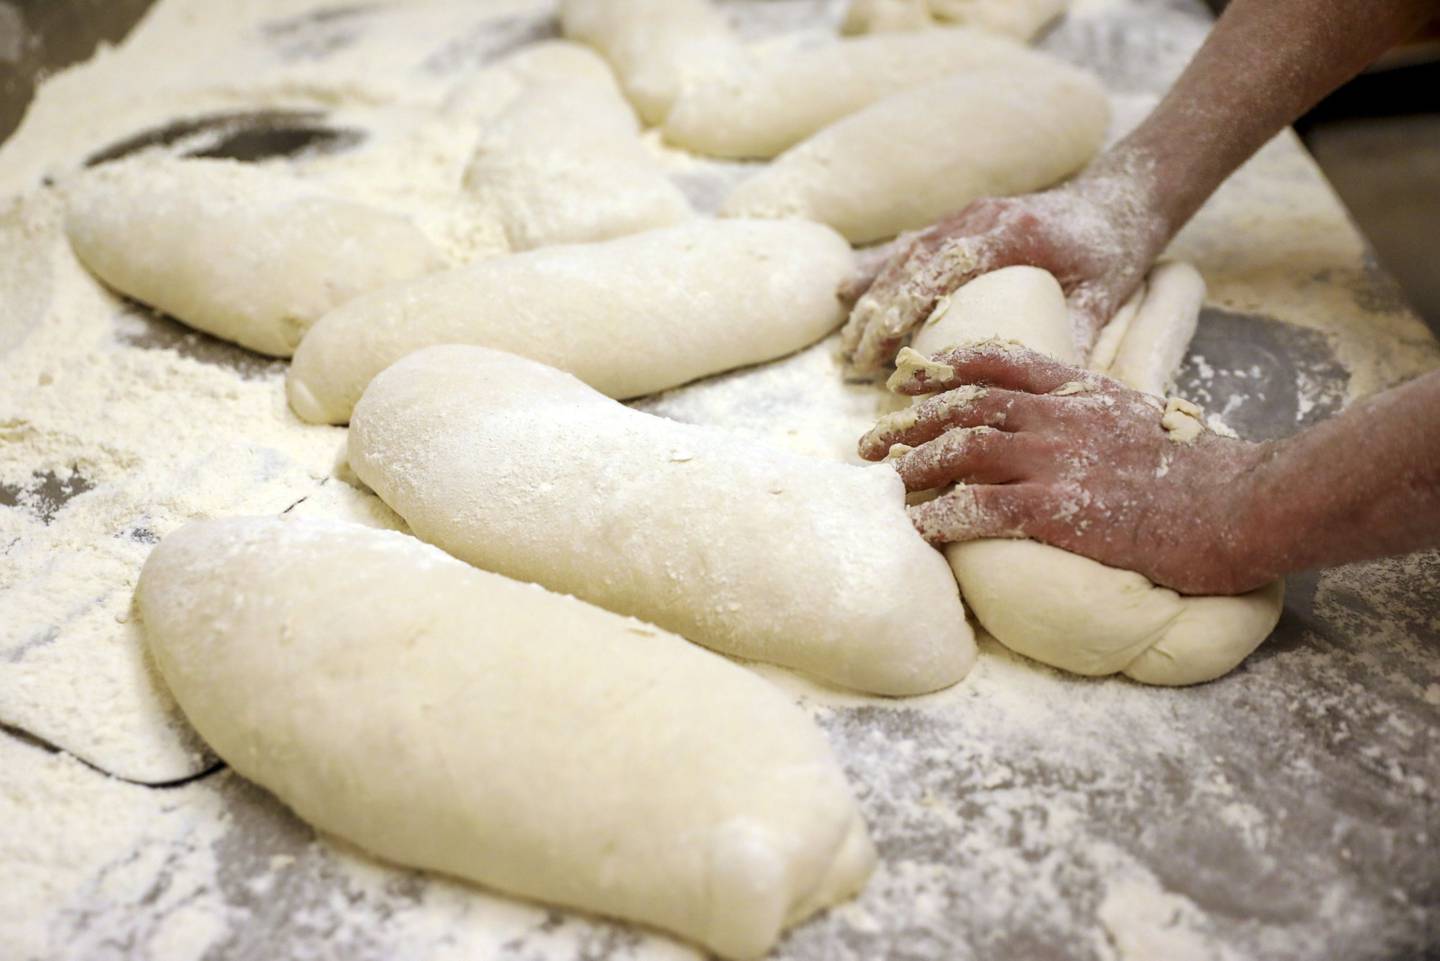 A baker kneads dough by hand while making bread at a bakery in Rome, Italy, on Wednesday, March 9, 2022. Wheat futures swung wildly between gains and losses Tuesday after climbing to unprecedented heights as Russia's attack on Ukraine disrupts global food supplies. Photographer: Alessia Pierdomenico/Bloomberg